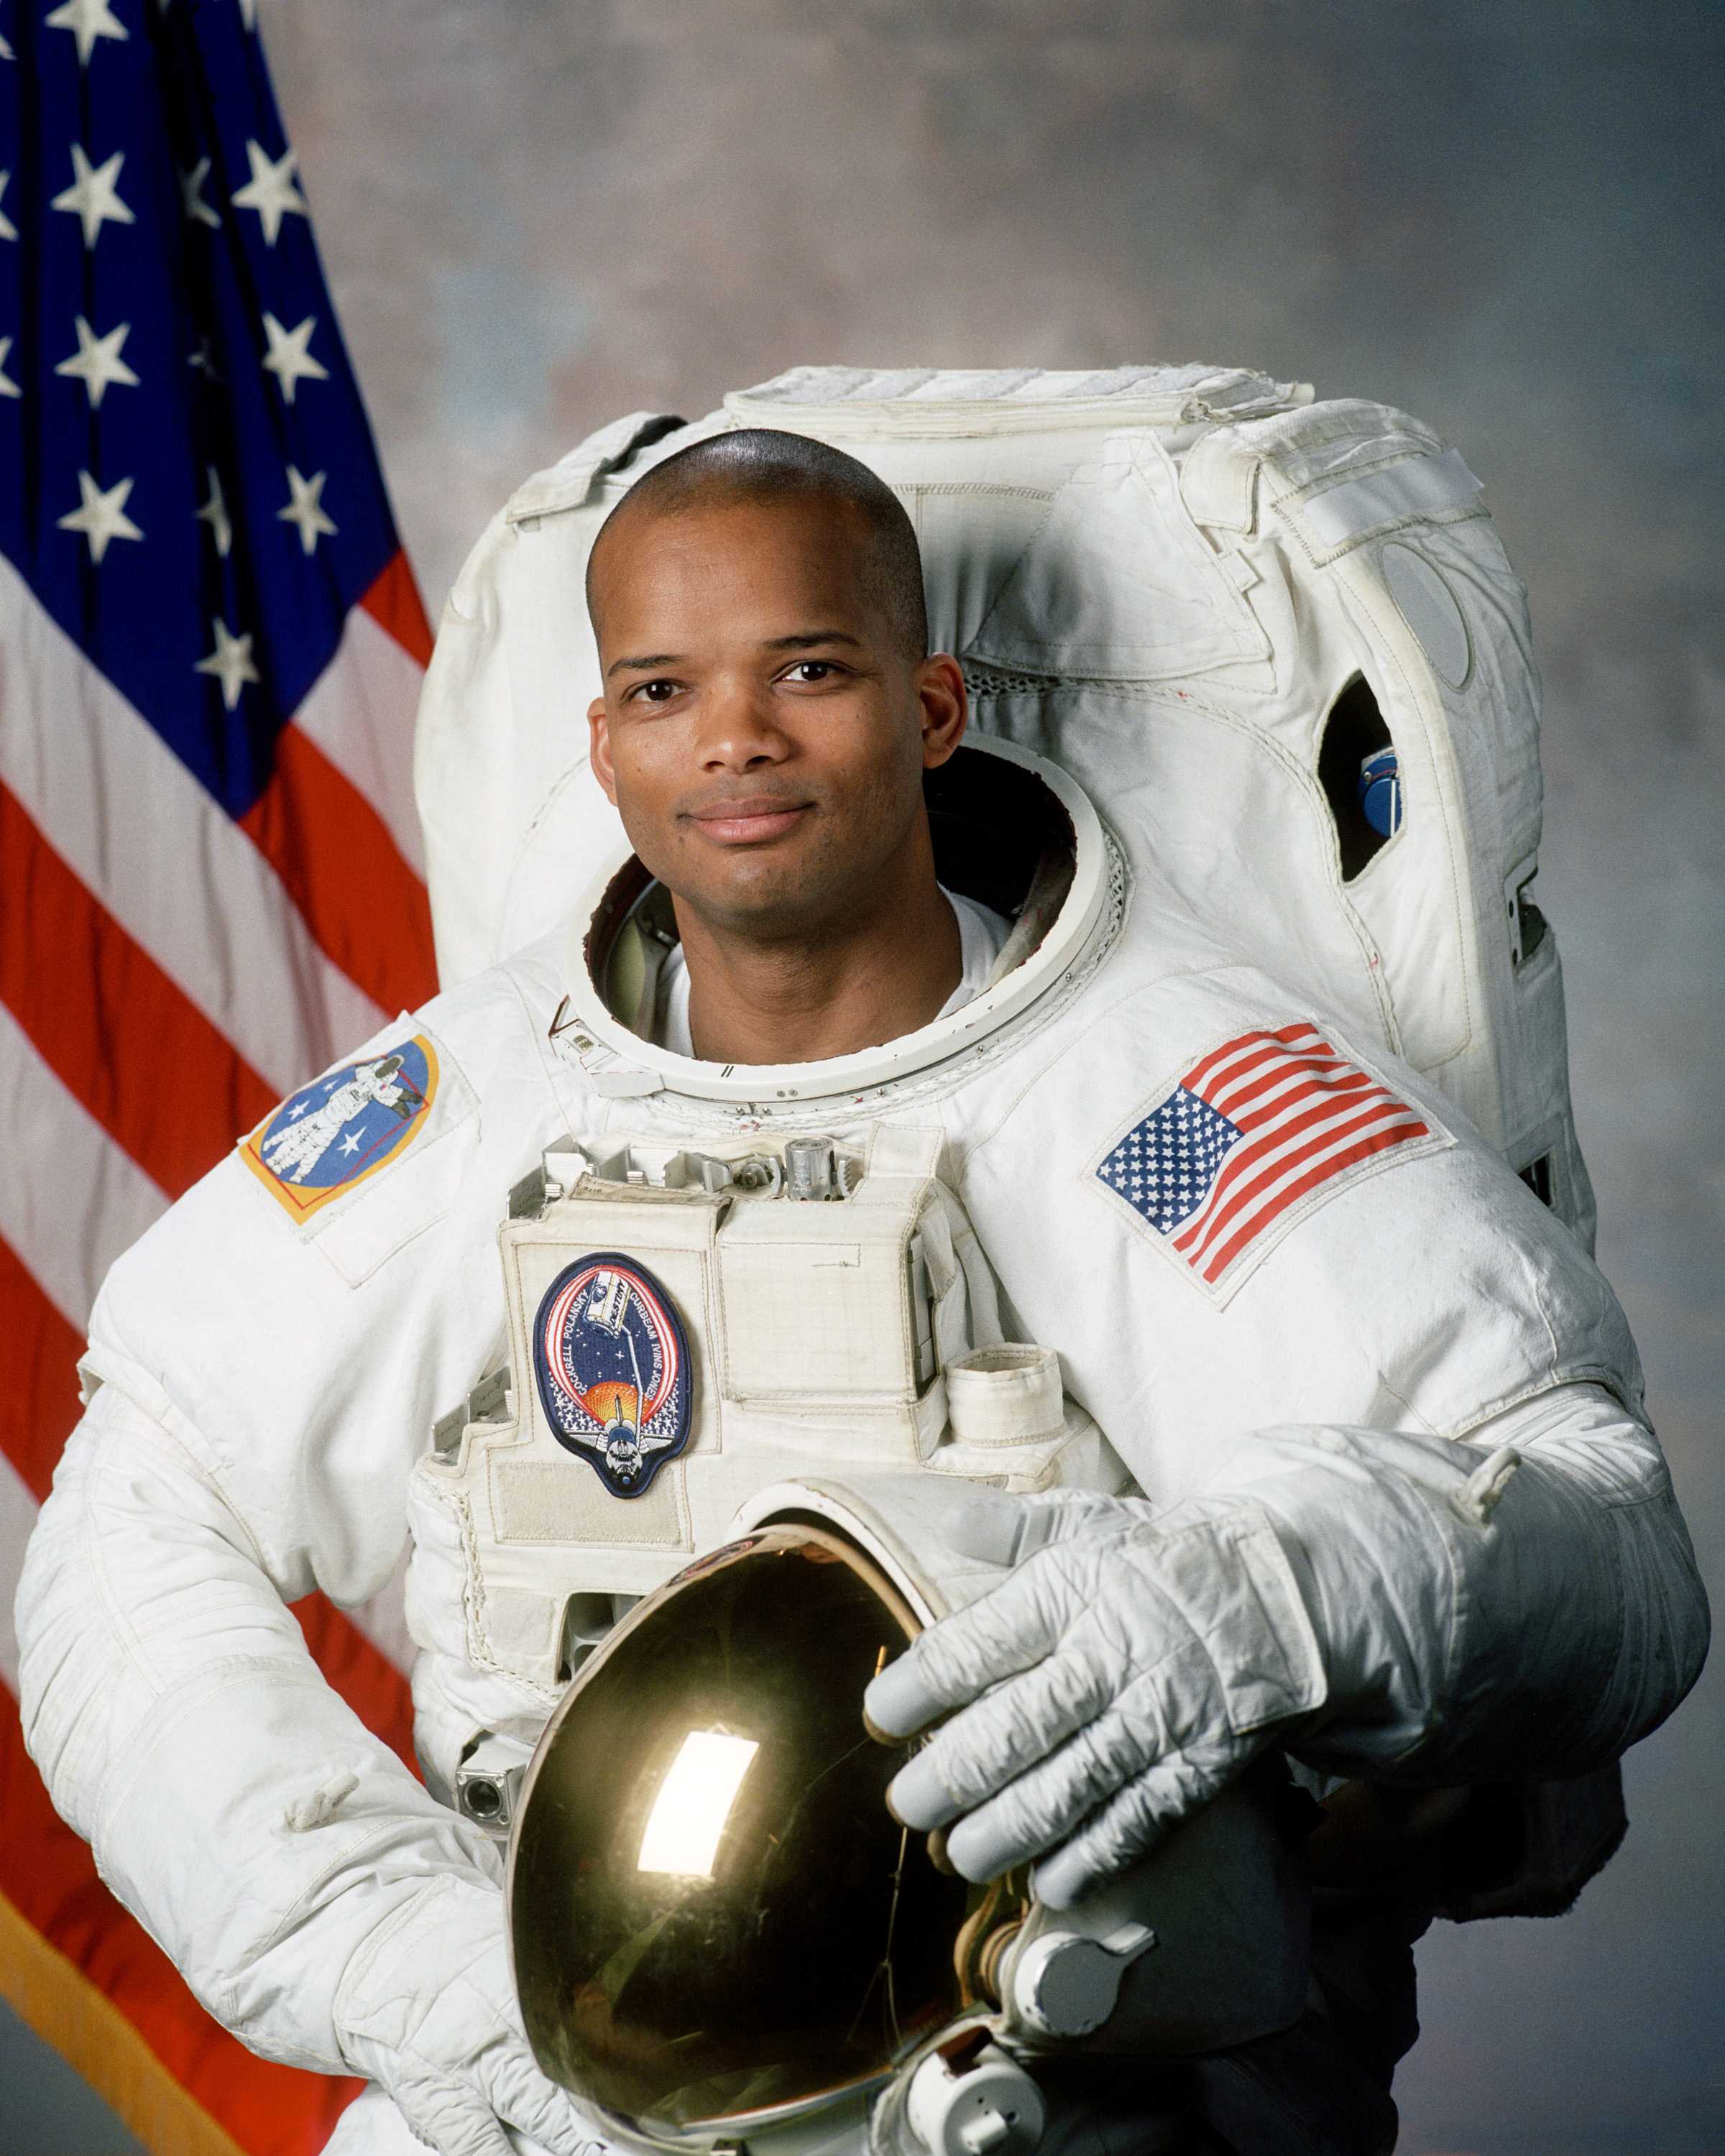 Robert Curbeam poses for a portrait in a white NASA space suit while holding a helmet.